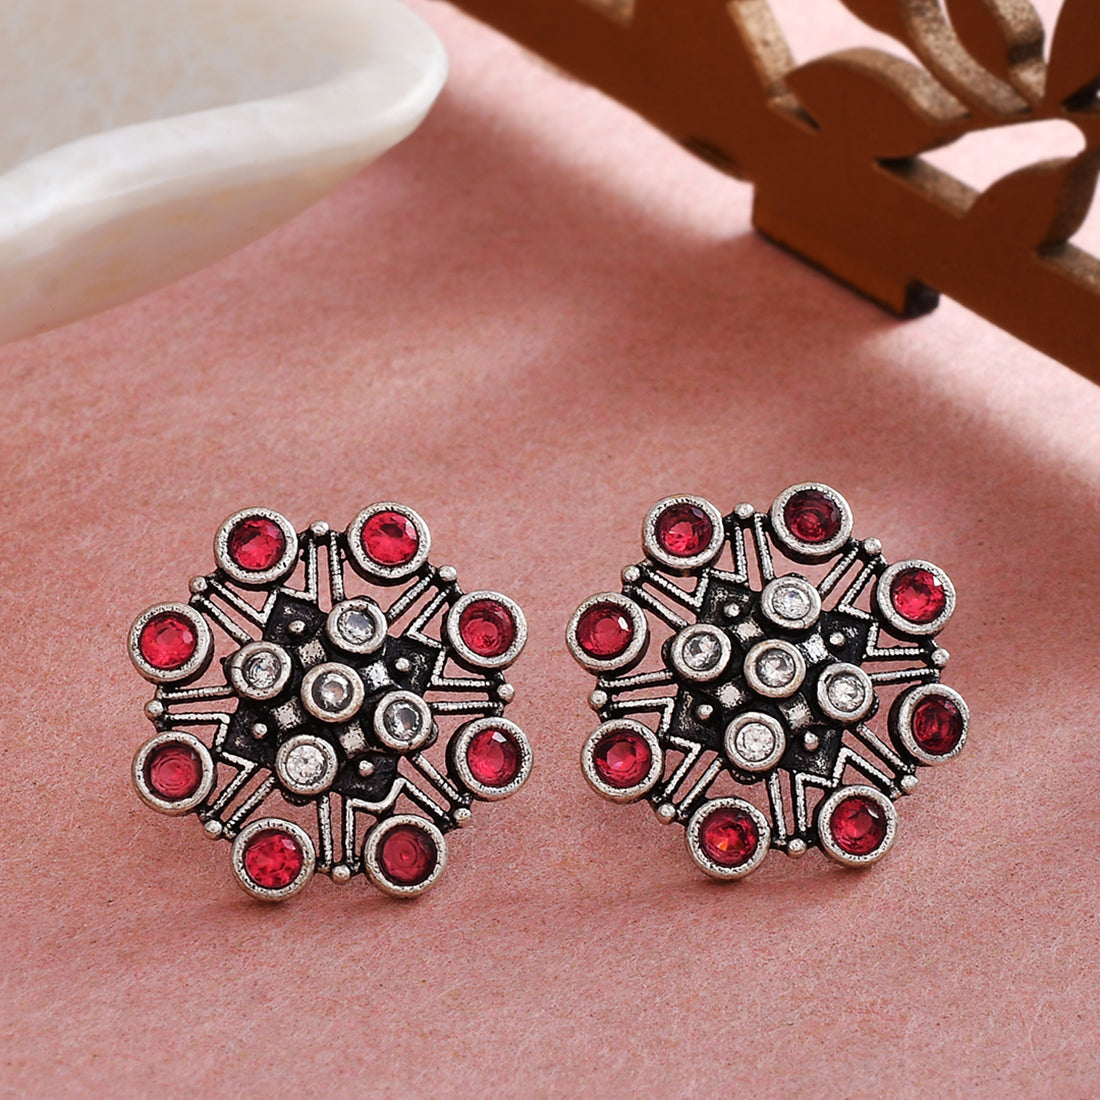 Women's Abharan White And Red Round Cut Stones Stud Earrings - Voylla